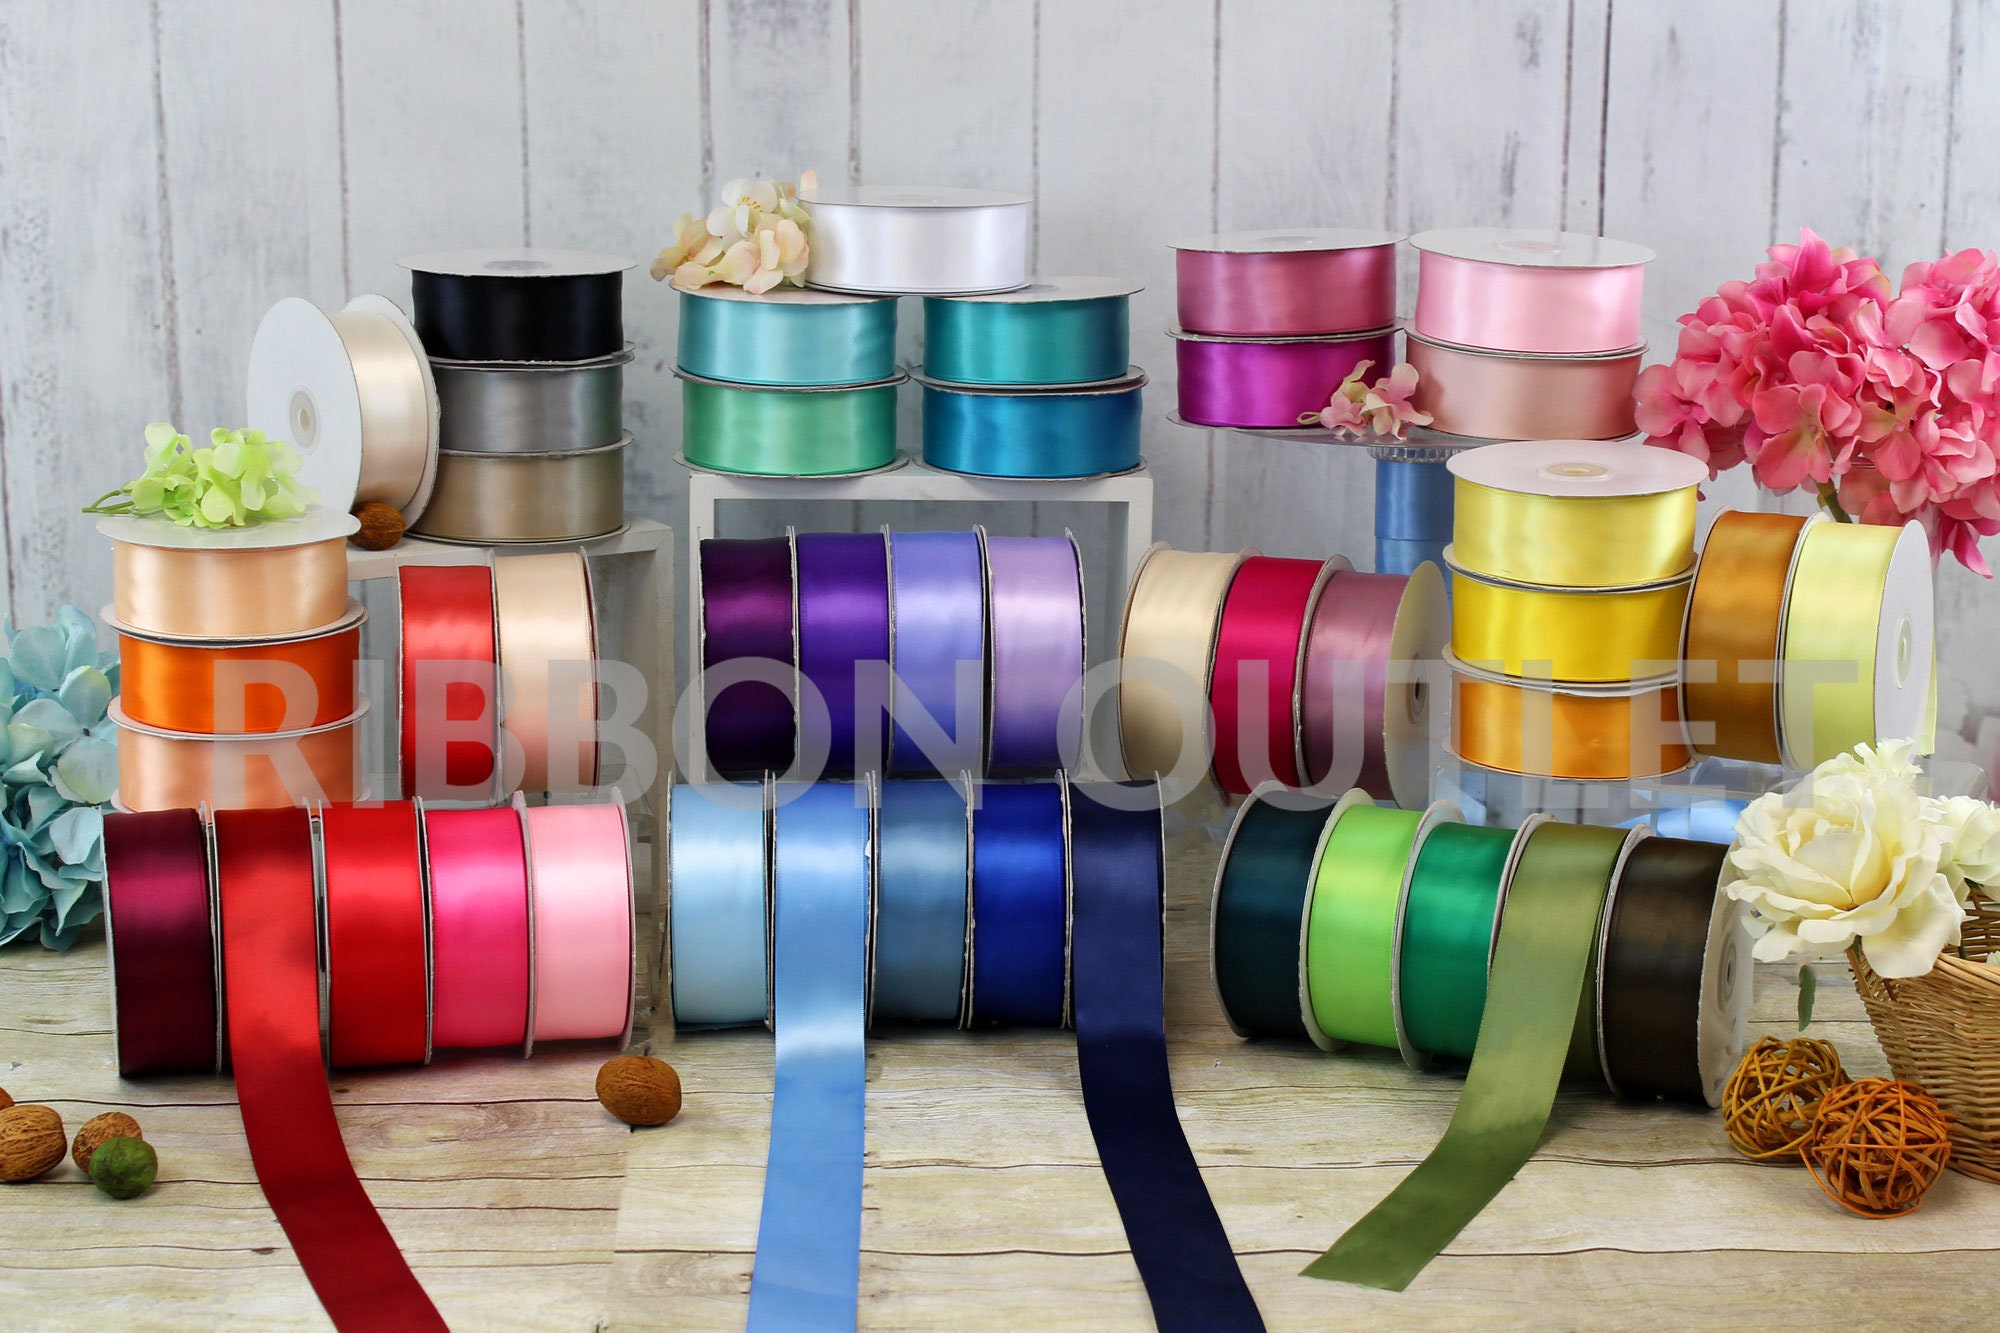 3 Rolls Ribbon for Gift Wrapping - Satin Ribbon, 1.5 Inches x 24 Yards  Fabric Satin Ribbon for Hair Bows Making, Gift Wrapping, Crafts,Wreath,  Wedding